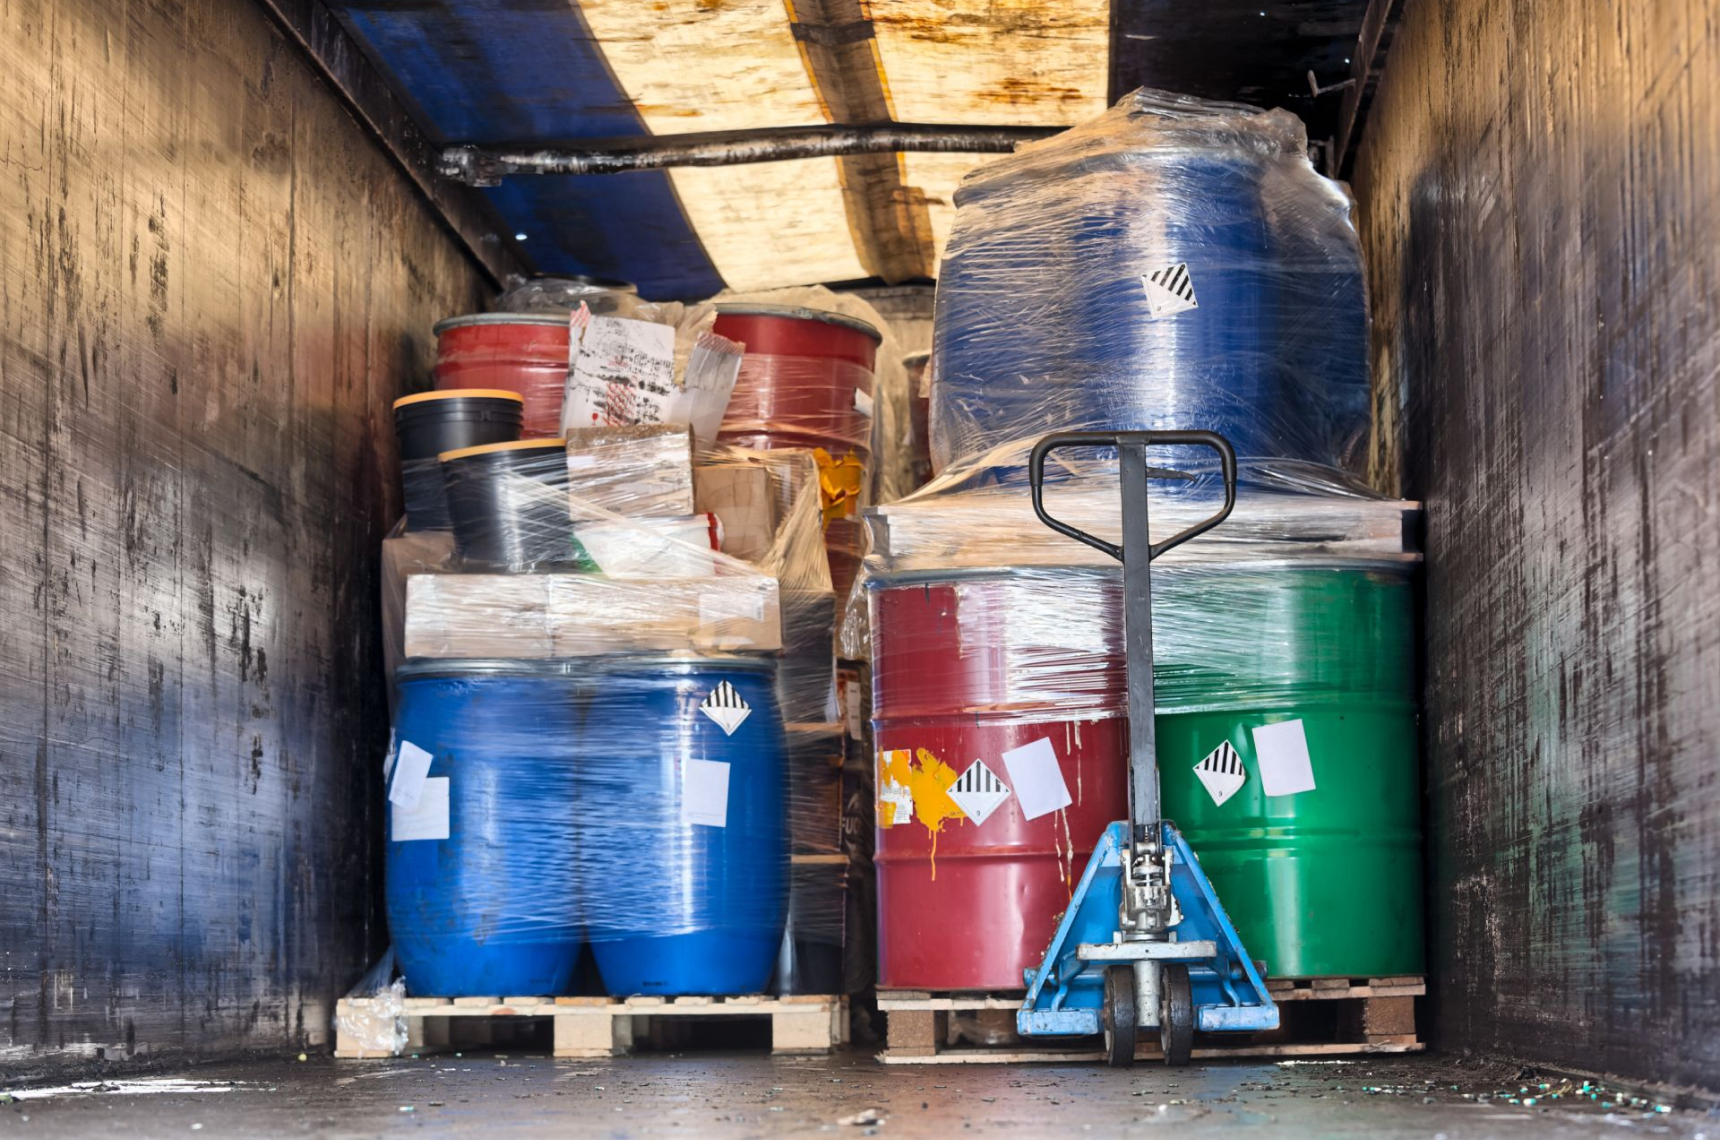 A shipment container filled with dangerous goods 